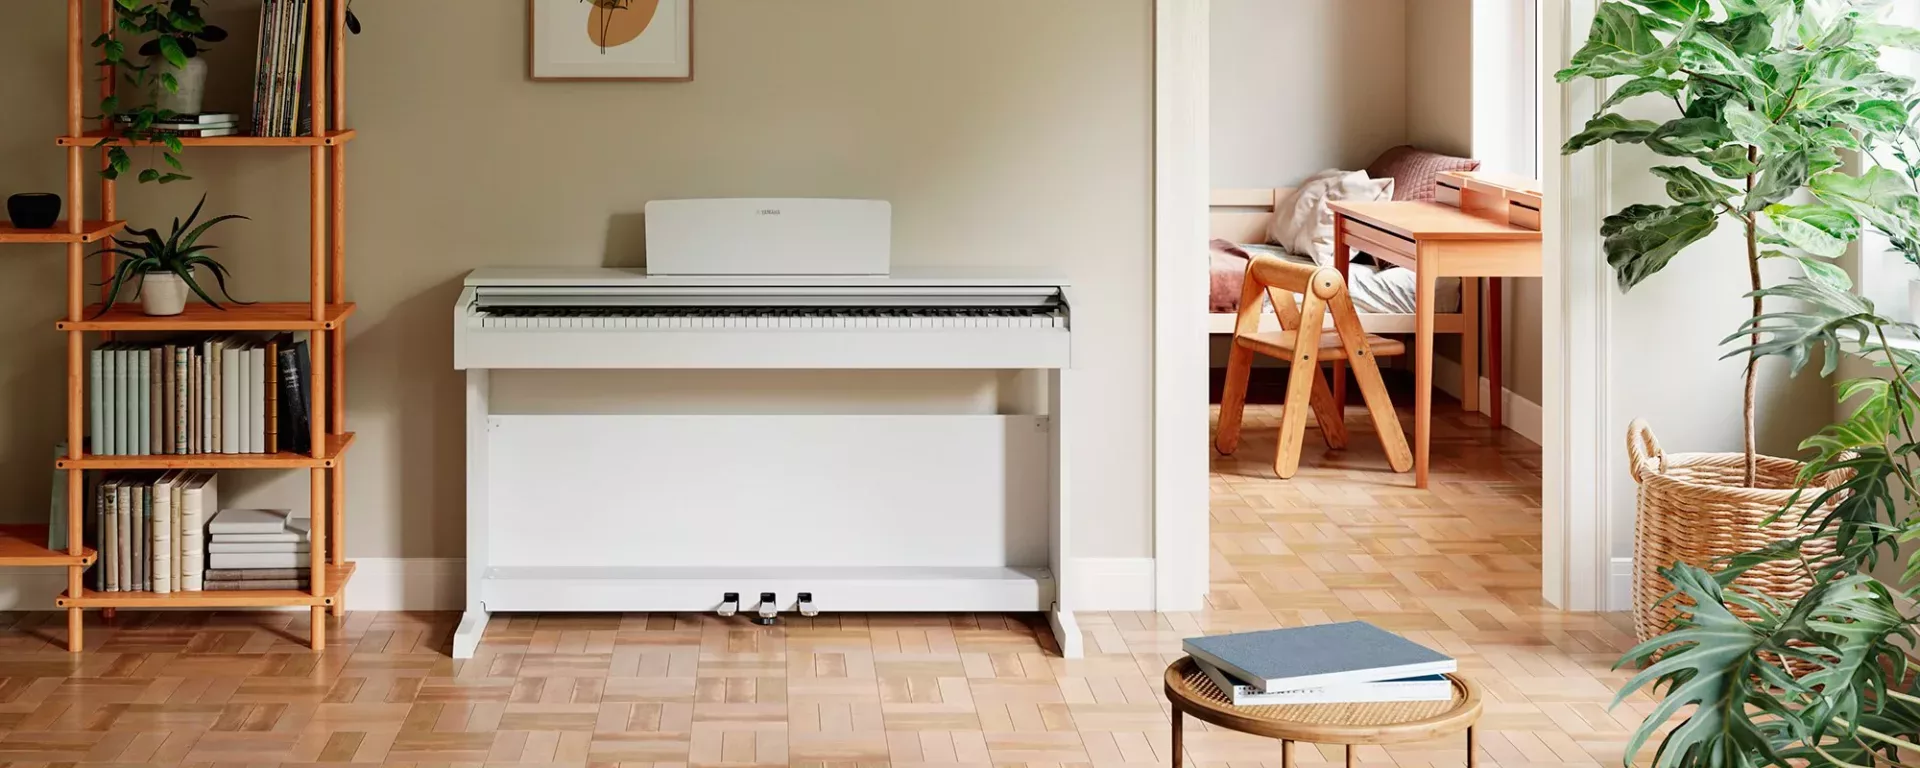 digital upright piano and bench - best piano accessories